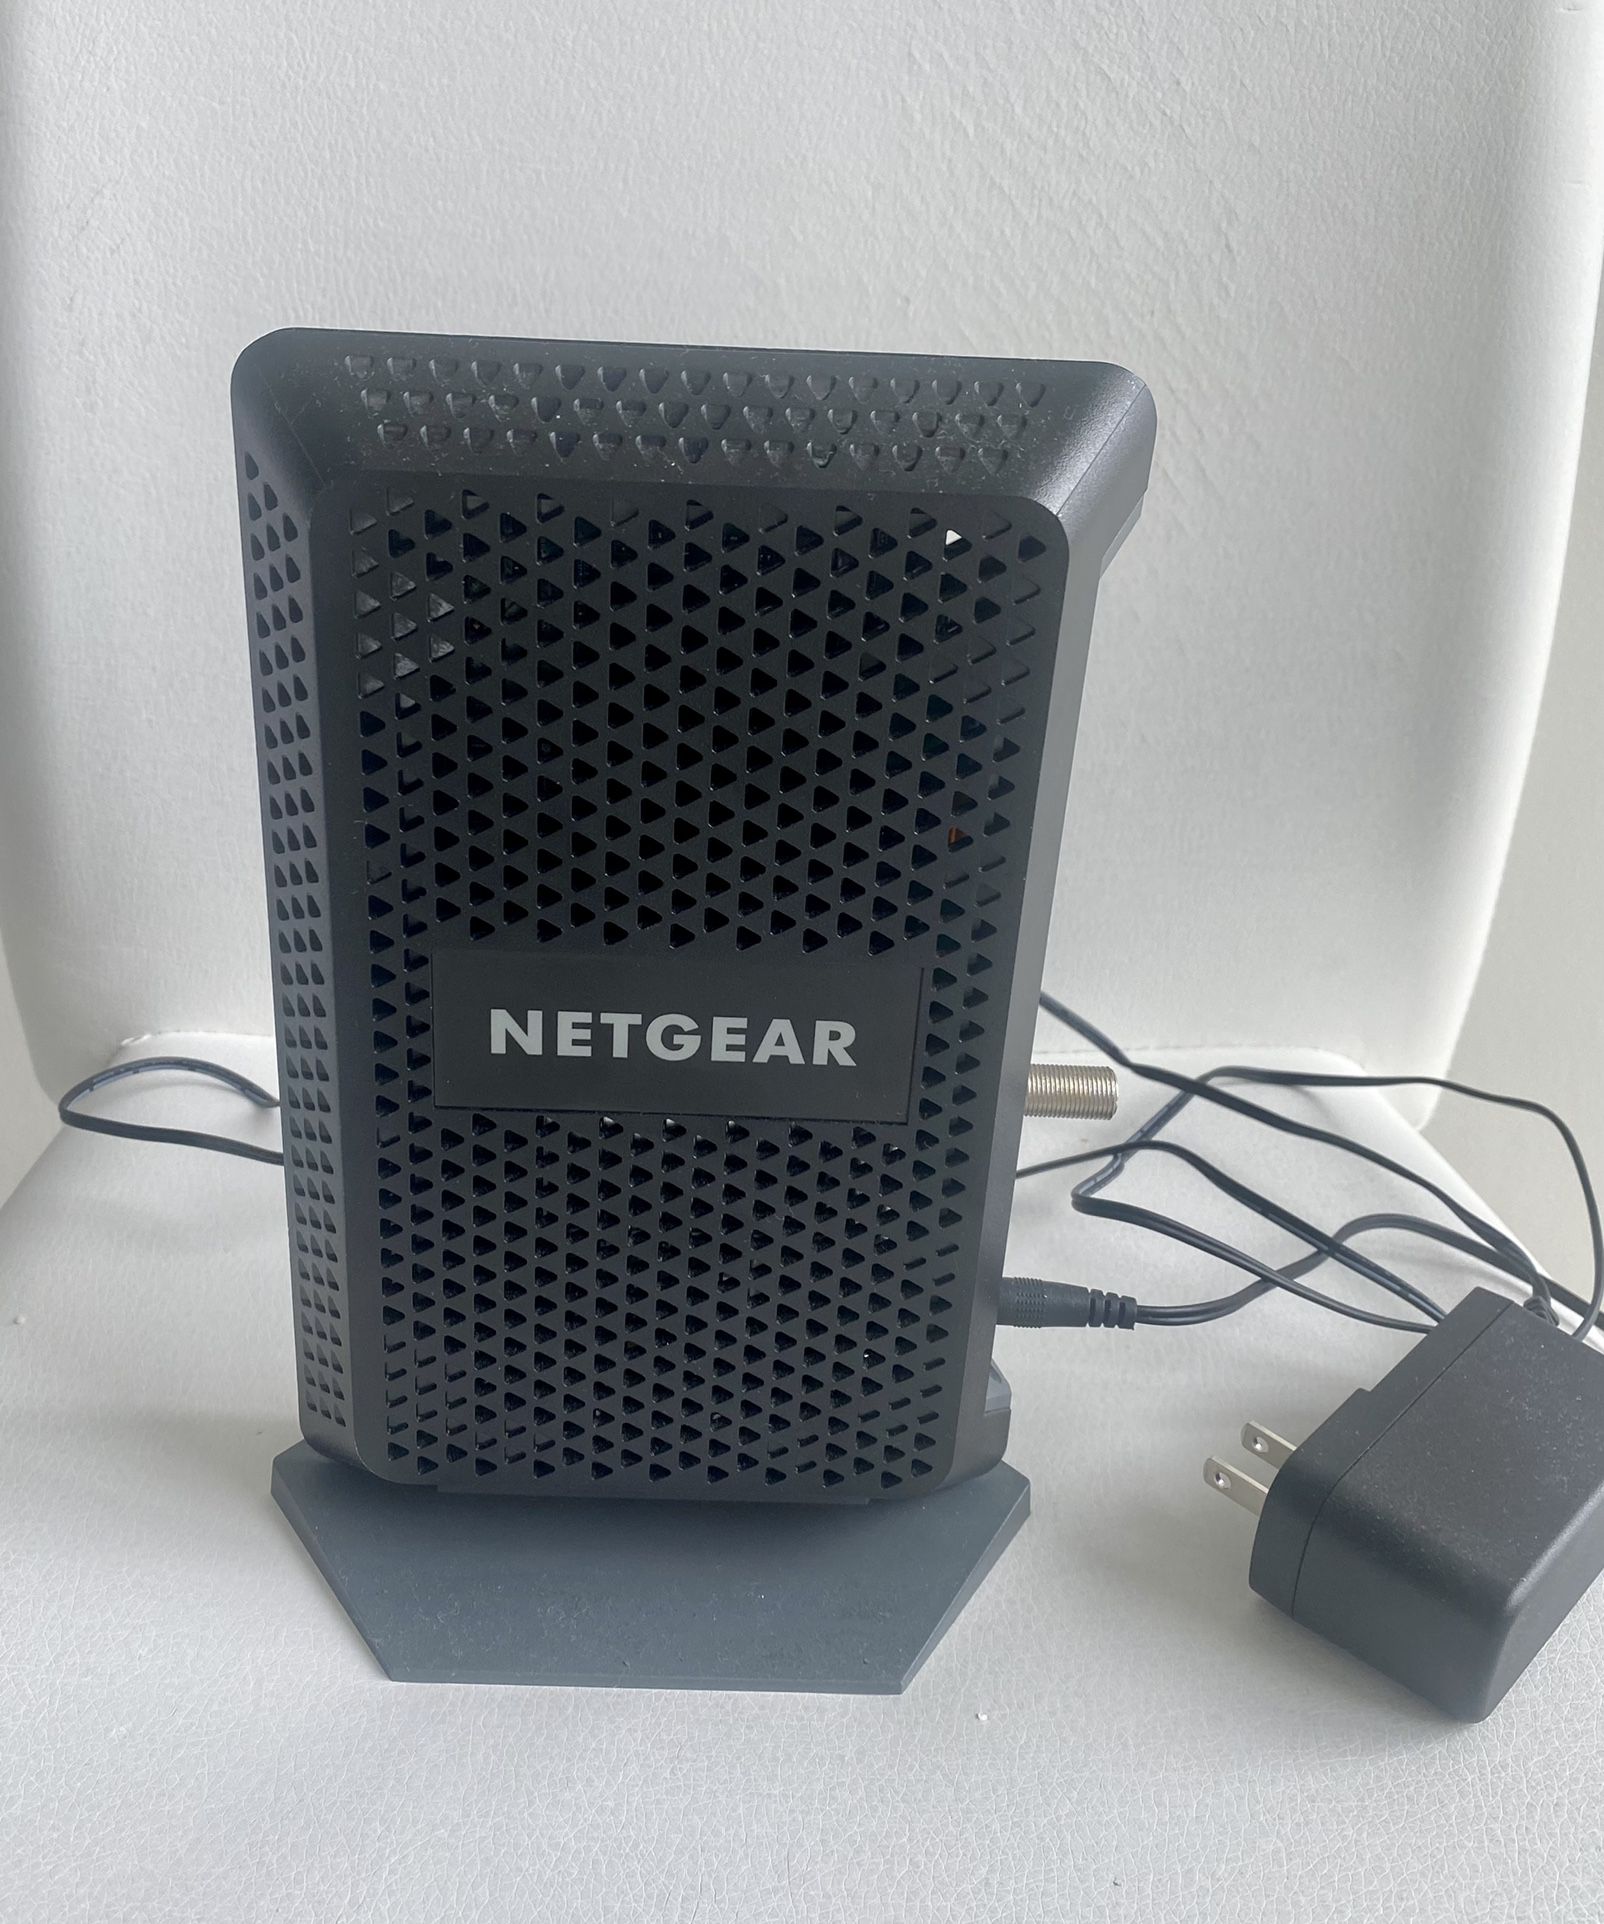 NETGEAR Cable Modem CM1000 - Compatible with All Cable Providers Including Xfinity by Comcast, Spectrum, Cox | for Cable Plans Up to 1 Gigabit | DOCSI